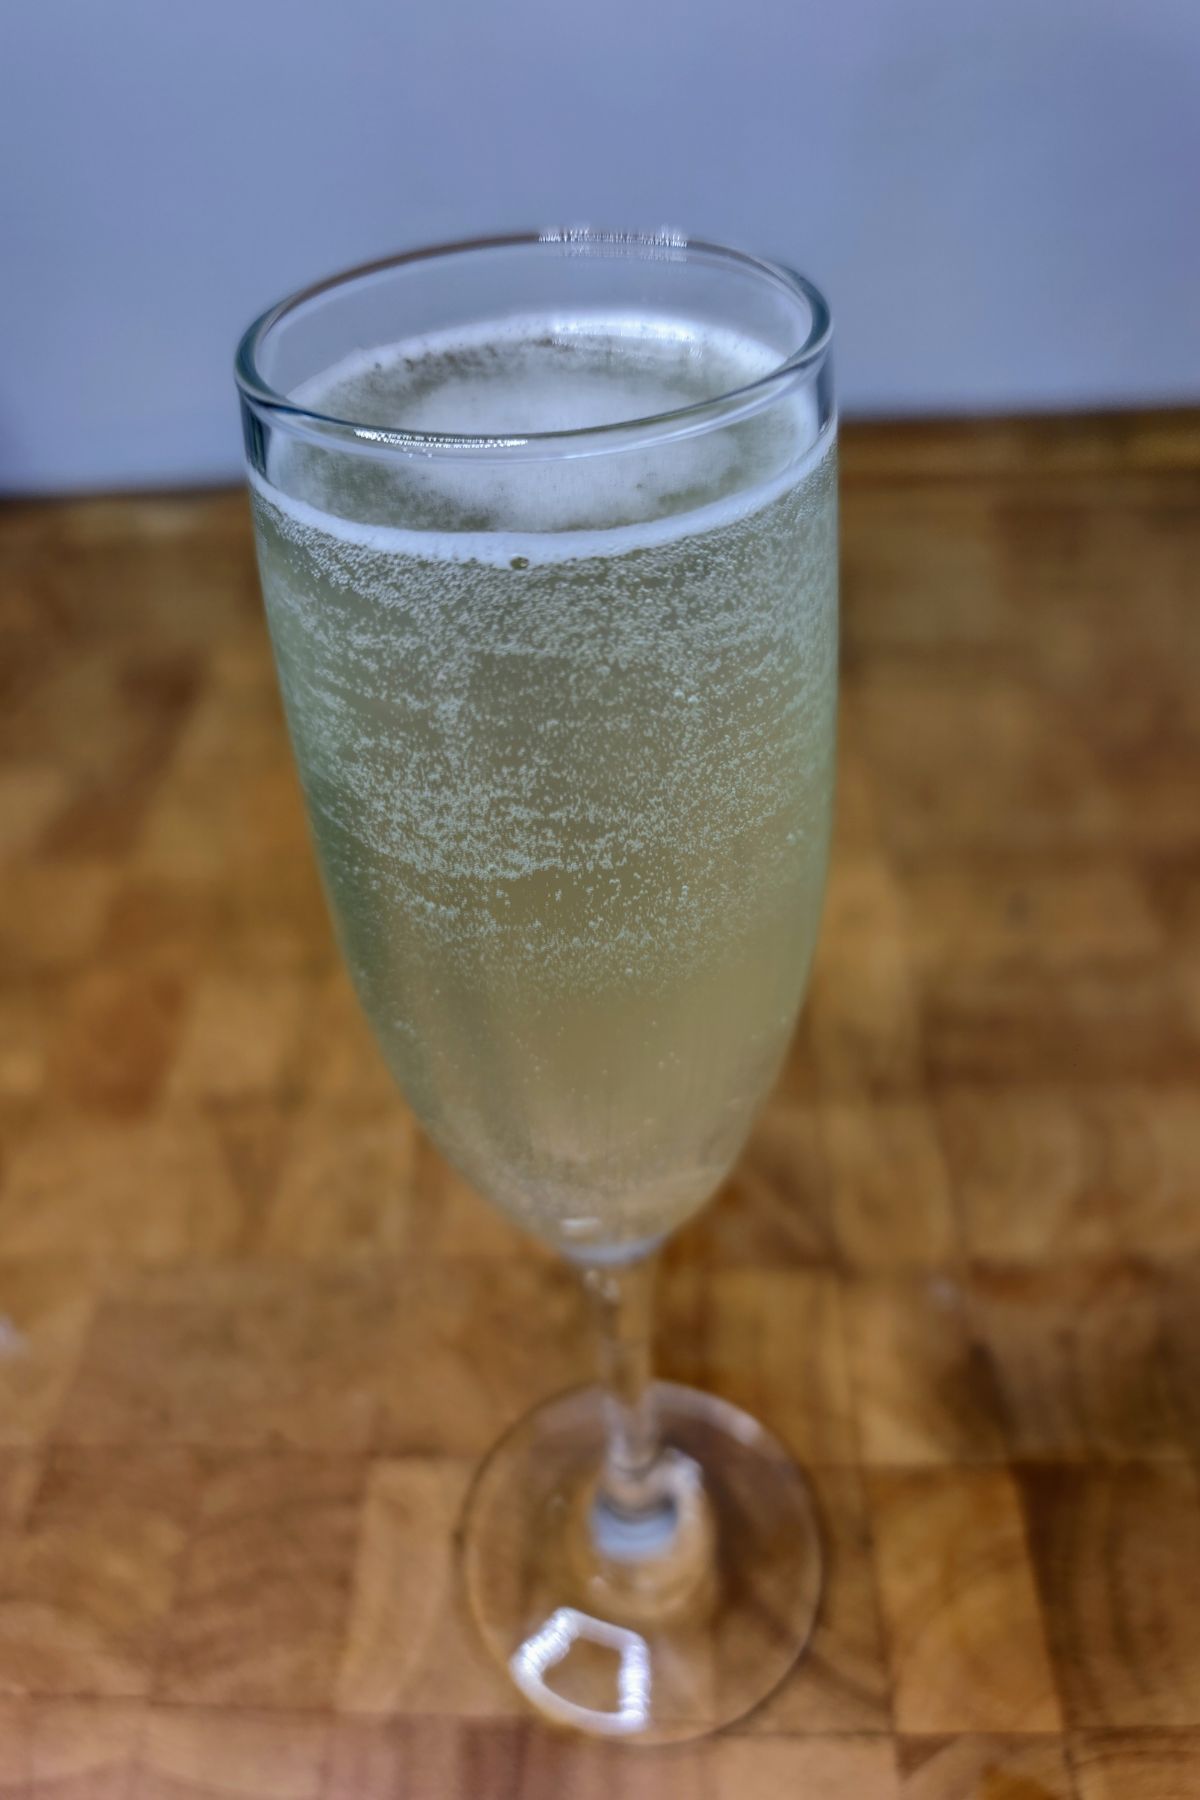 French 75 cocktail on a wooden table.